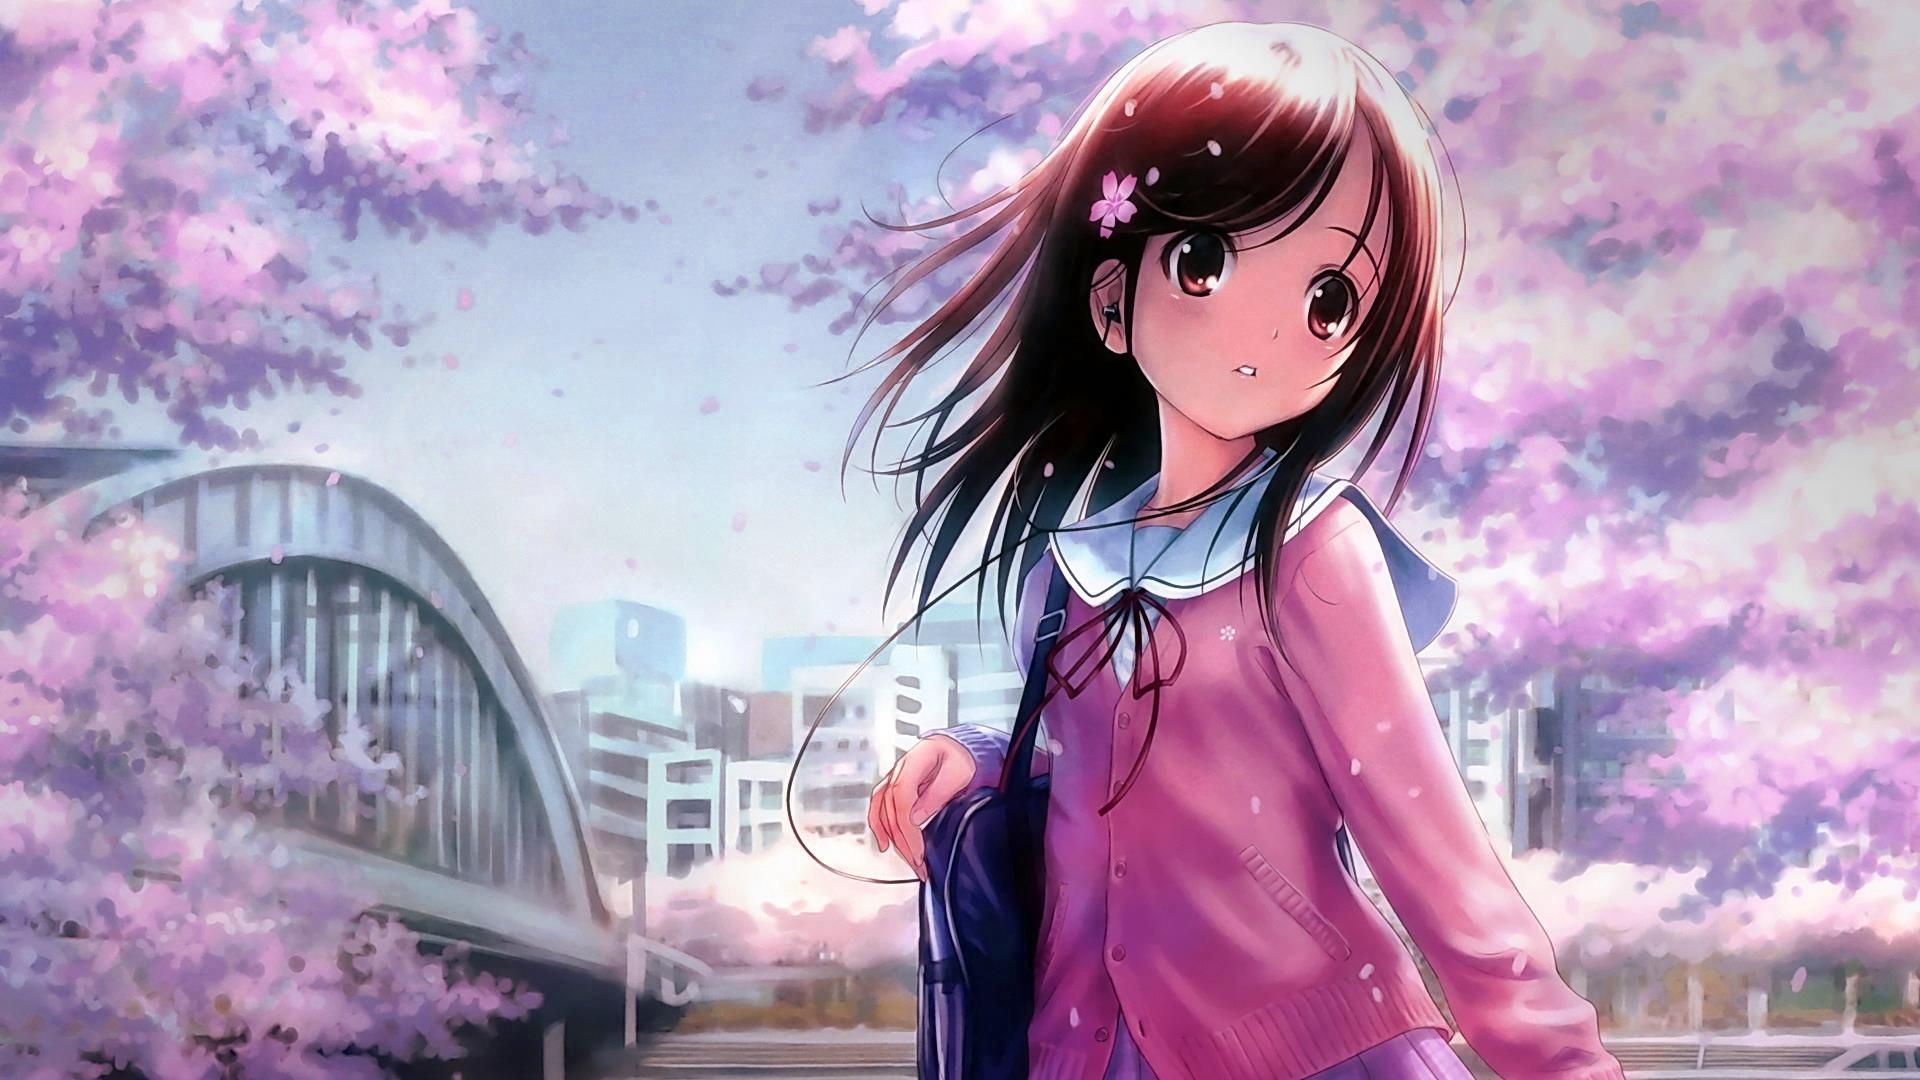 44+ Japanese Anime Wallpapers: HD, 4K, 5K for PC and Mobile | Download free  images for iPhone, Android